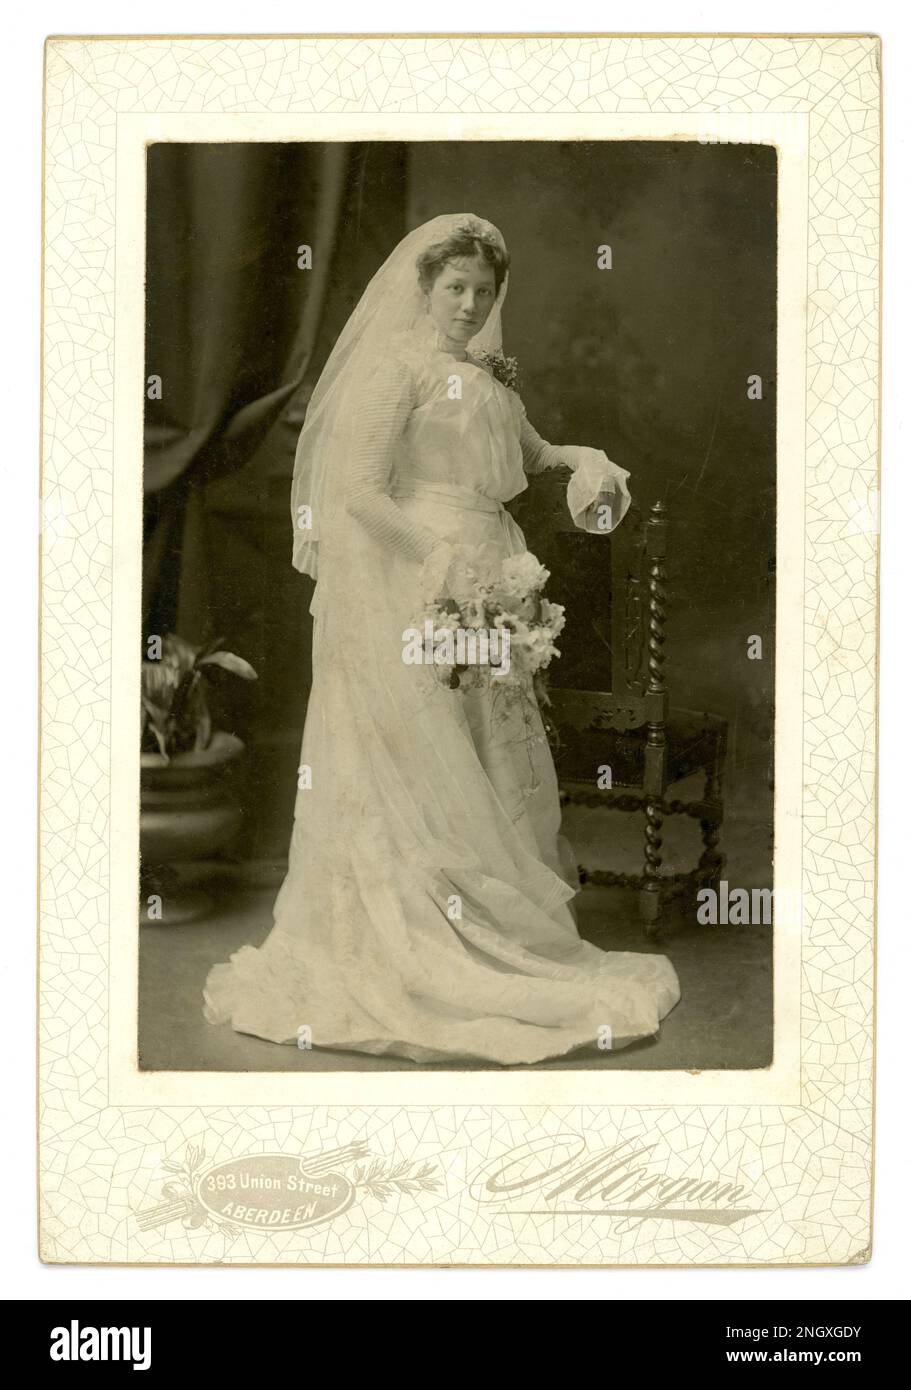 Original Edwardian era studio wedding cabinet card portrait of a beautiful young bride wearing a long white dress, with high neckline, and long veil, holding a bouquet of flowers. The sleeve and neckline styles date the photograph to circa 1900-1902. Edwardian wedding. Edwardian bride. From the studio of G (George William) Morgan, 393 Union Street, Aberdeen, Scotland, U.K. Stock Photo